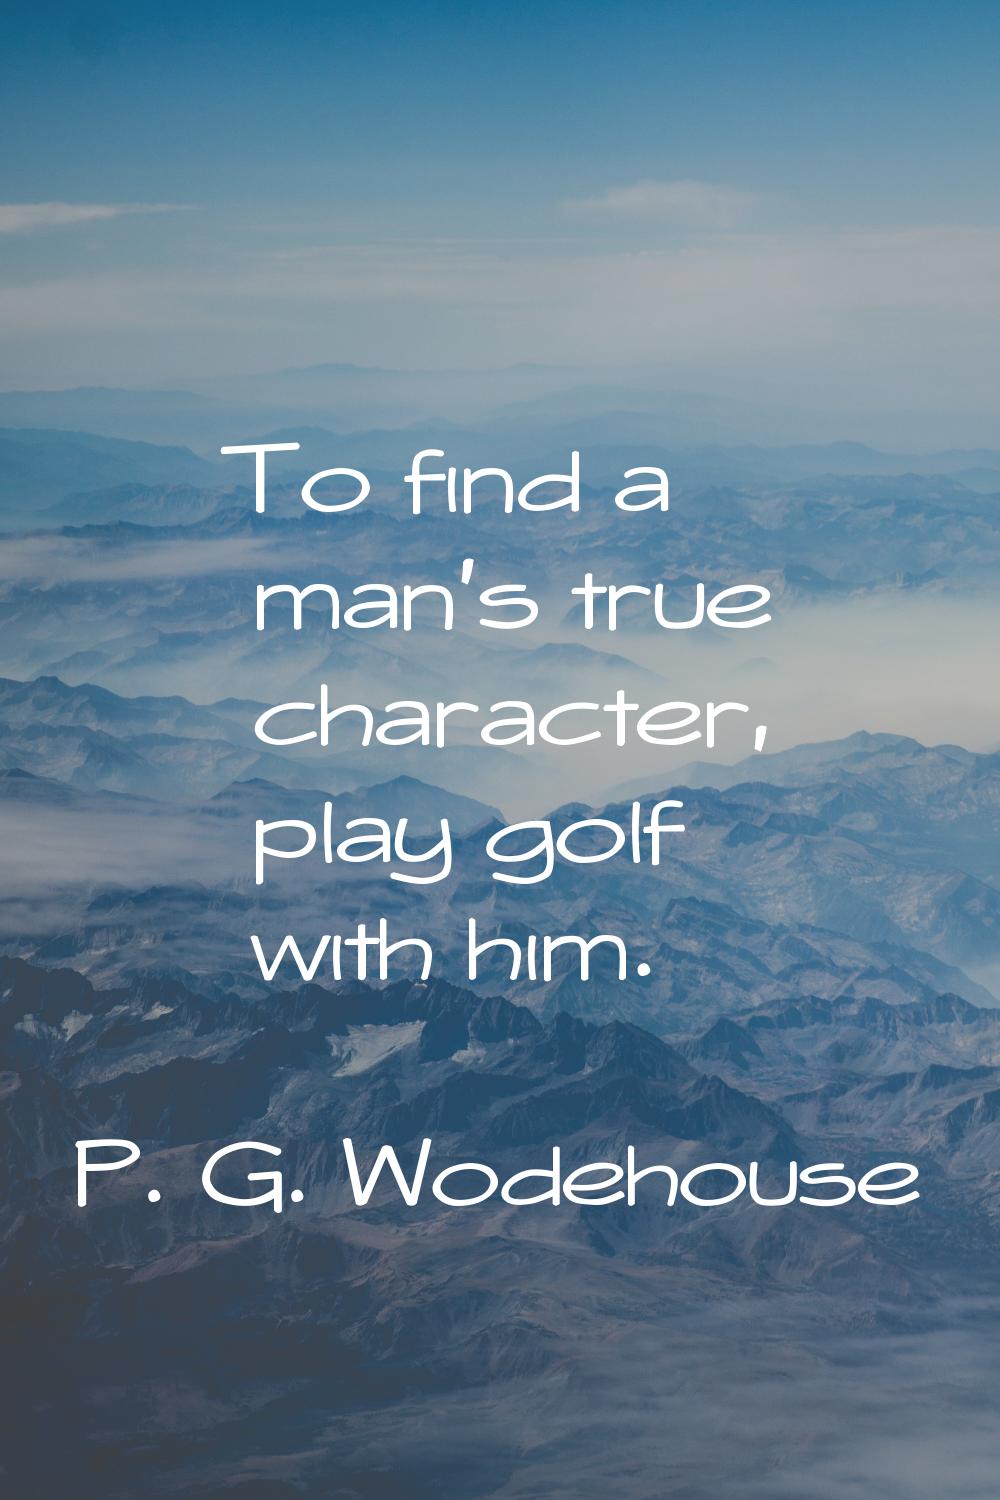 To find a man's true character, play golf with him.